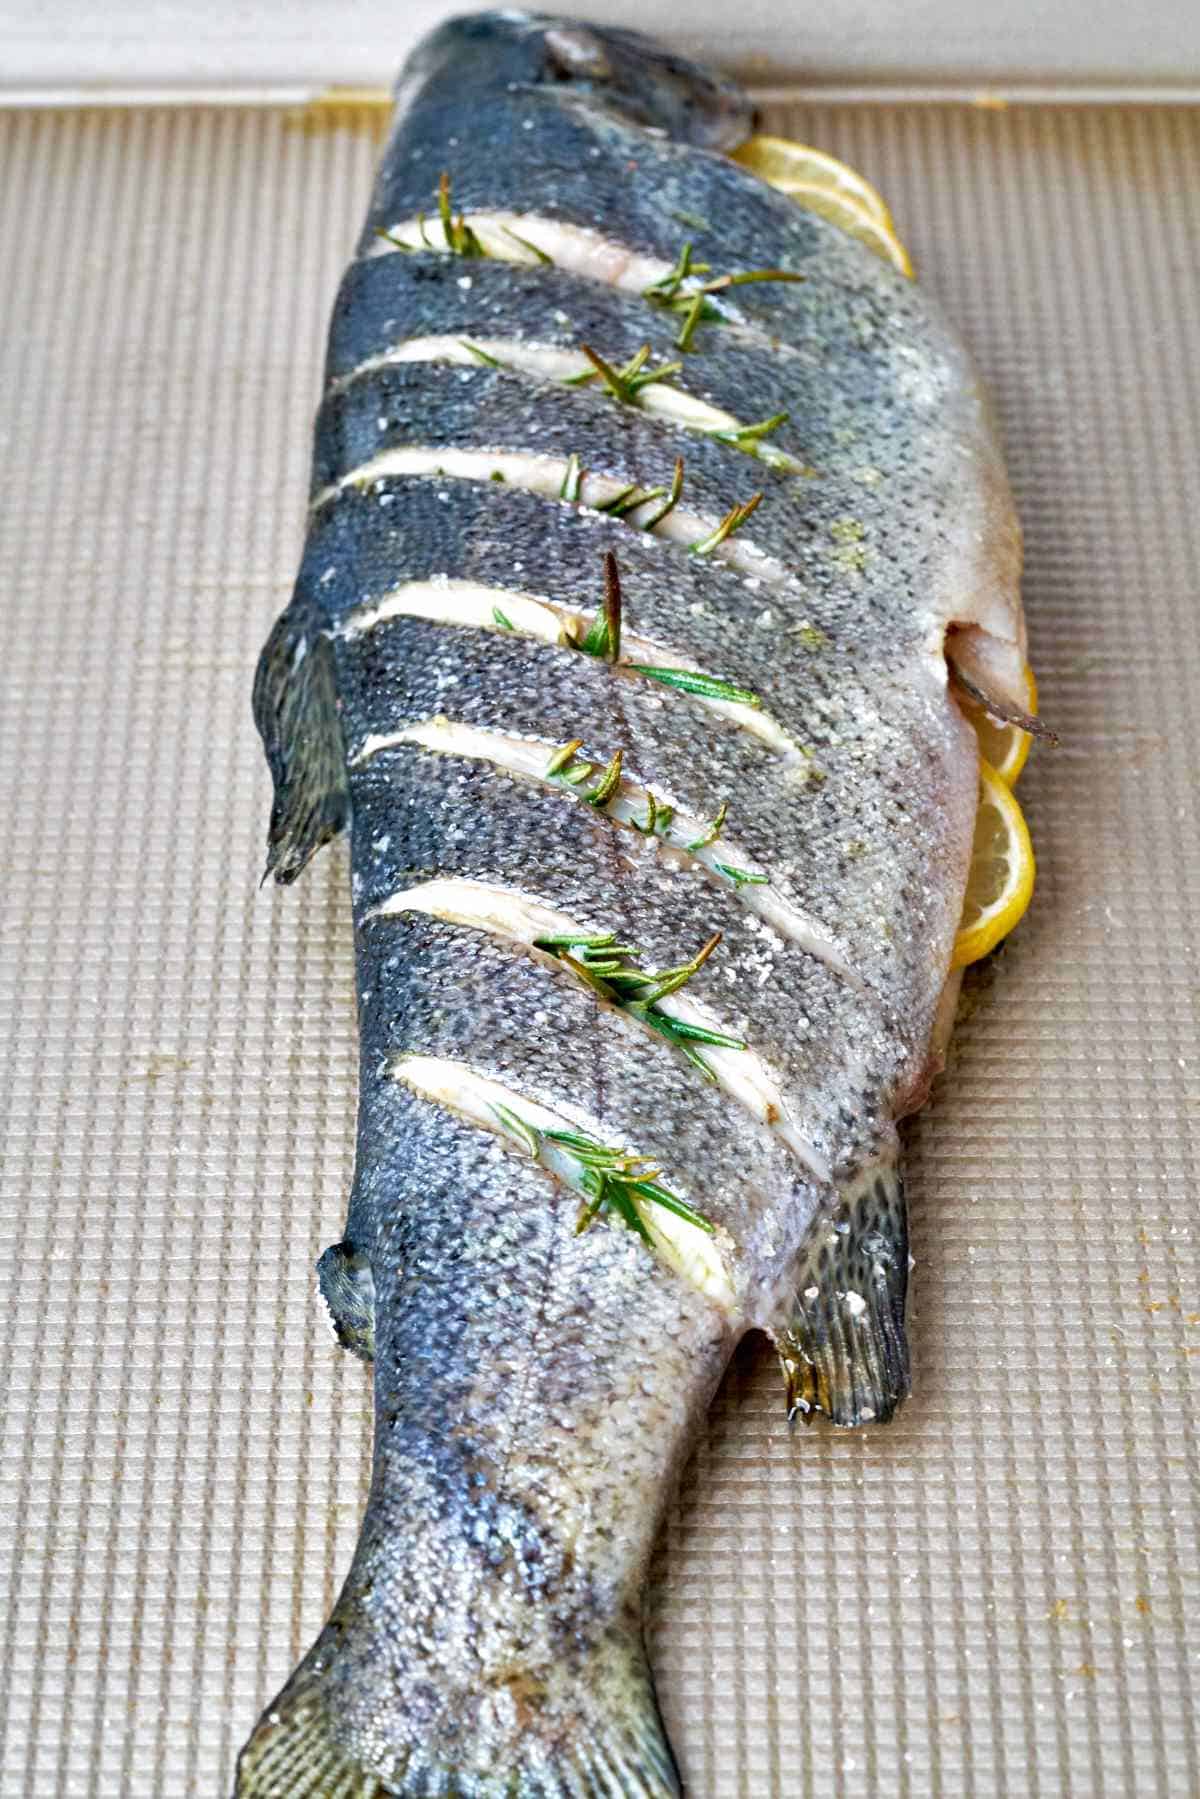 Cooked trout with rosemary in slits cut into it and lemon slices in the cavity.